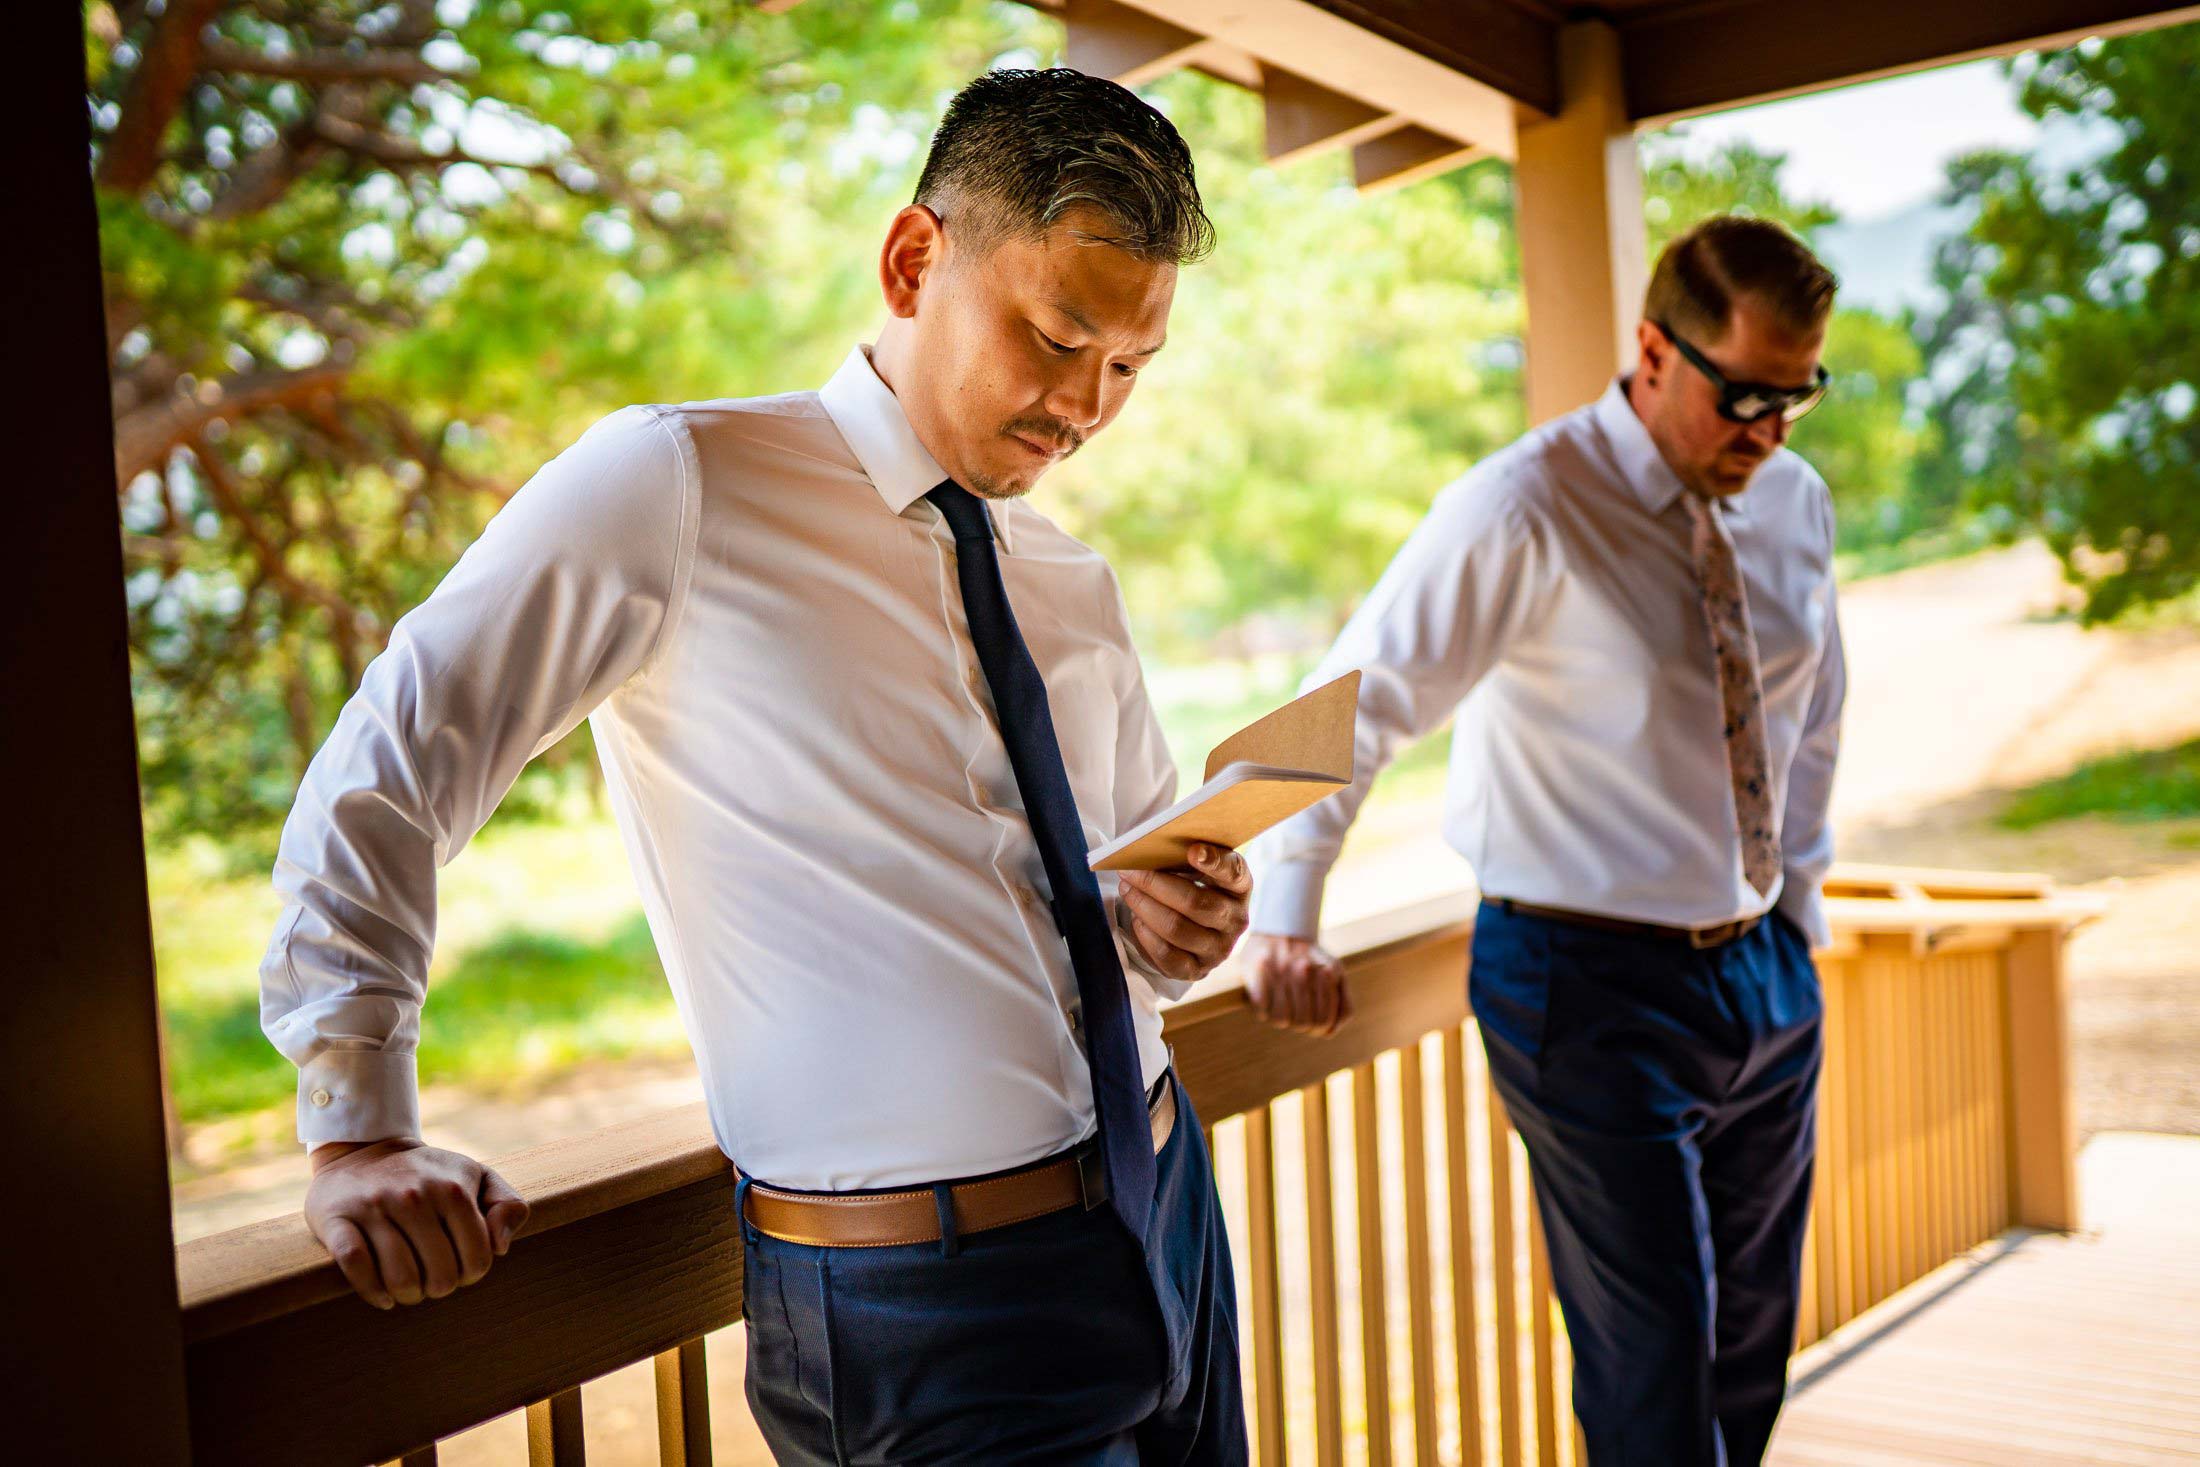 Groom gets ready in log cabin in the forest, wedding, wedding photos, wedding photography, wedding photographer, wedding inspiration, wedding photo inspiration, mountain wedding, YMCA of the Rockies wedding, YMCA of the Rockies wedding photos, YMCA of the Rockies wedding photography, YMCA of the Rockies wedding photographer, YMCA of the Rockies wedding inspiration, YMCA of the Rockies wedding venue, Estes Park wedding, Estes Park wedding photos, Estes Park wedding photography, Estes Park wedding photographer, Colorado wedding, Colorado wedding photos, Colorado wedding photography, Colorado wedding photographer, Colorado mountain wedding, Colorado wedding inspiration